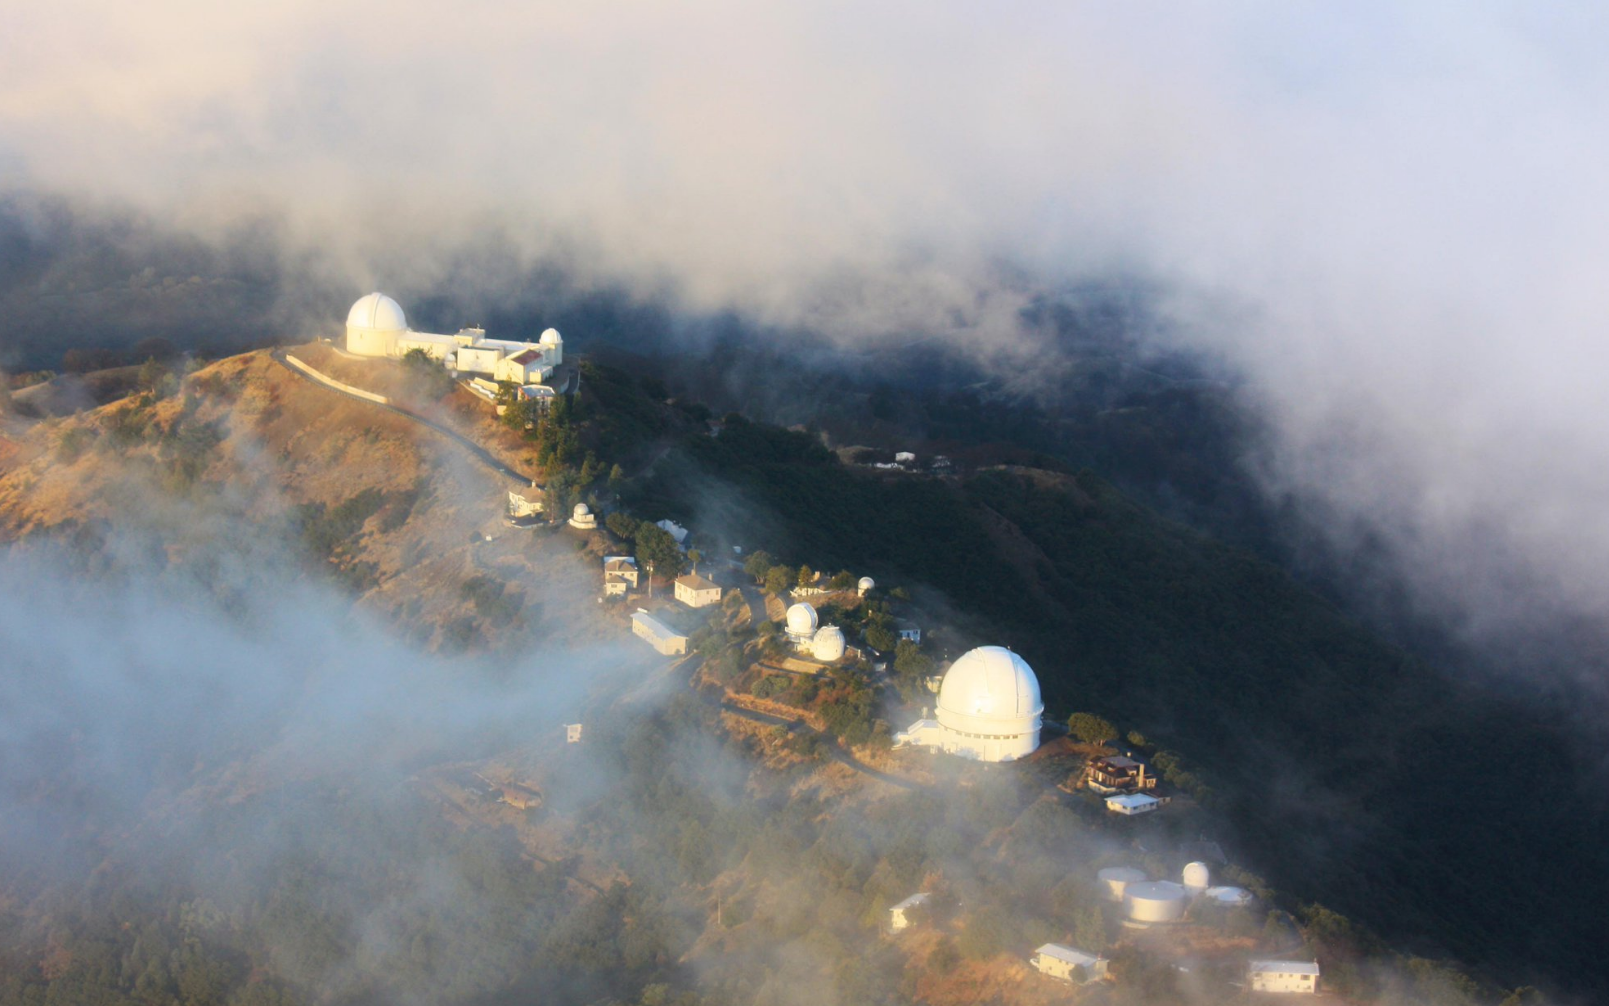 Lick Observatory from the air by Ilse Ungeheuer